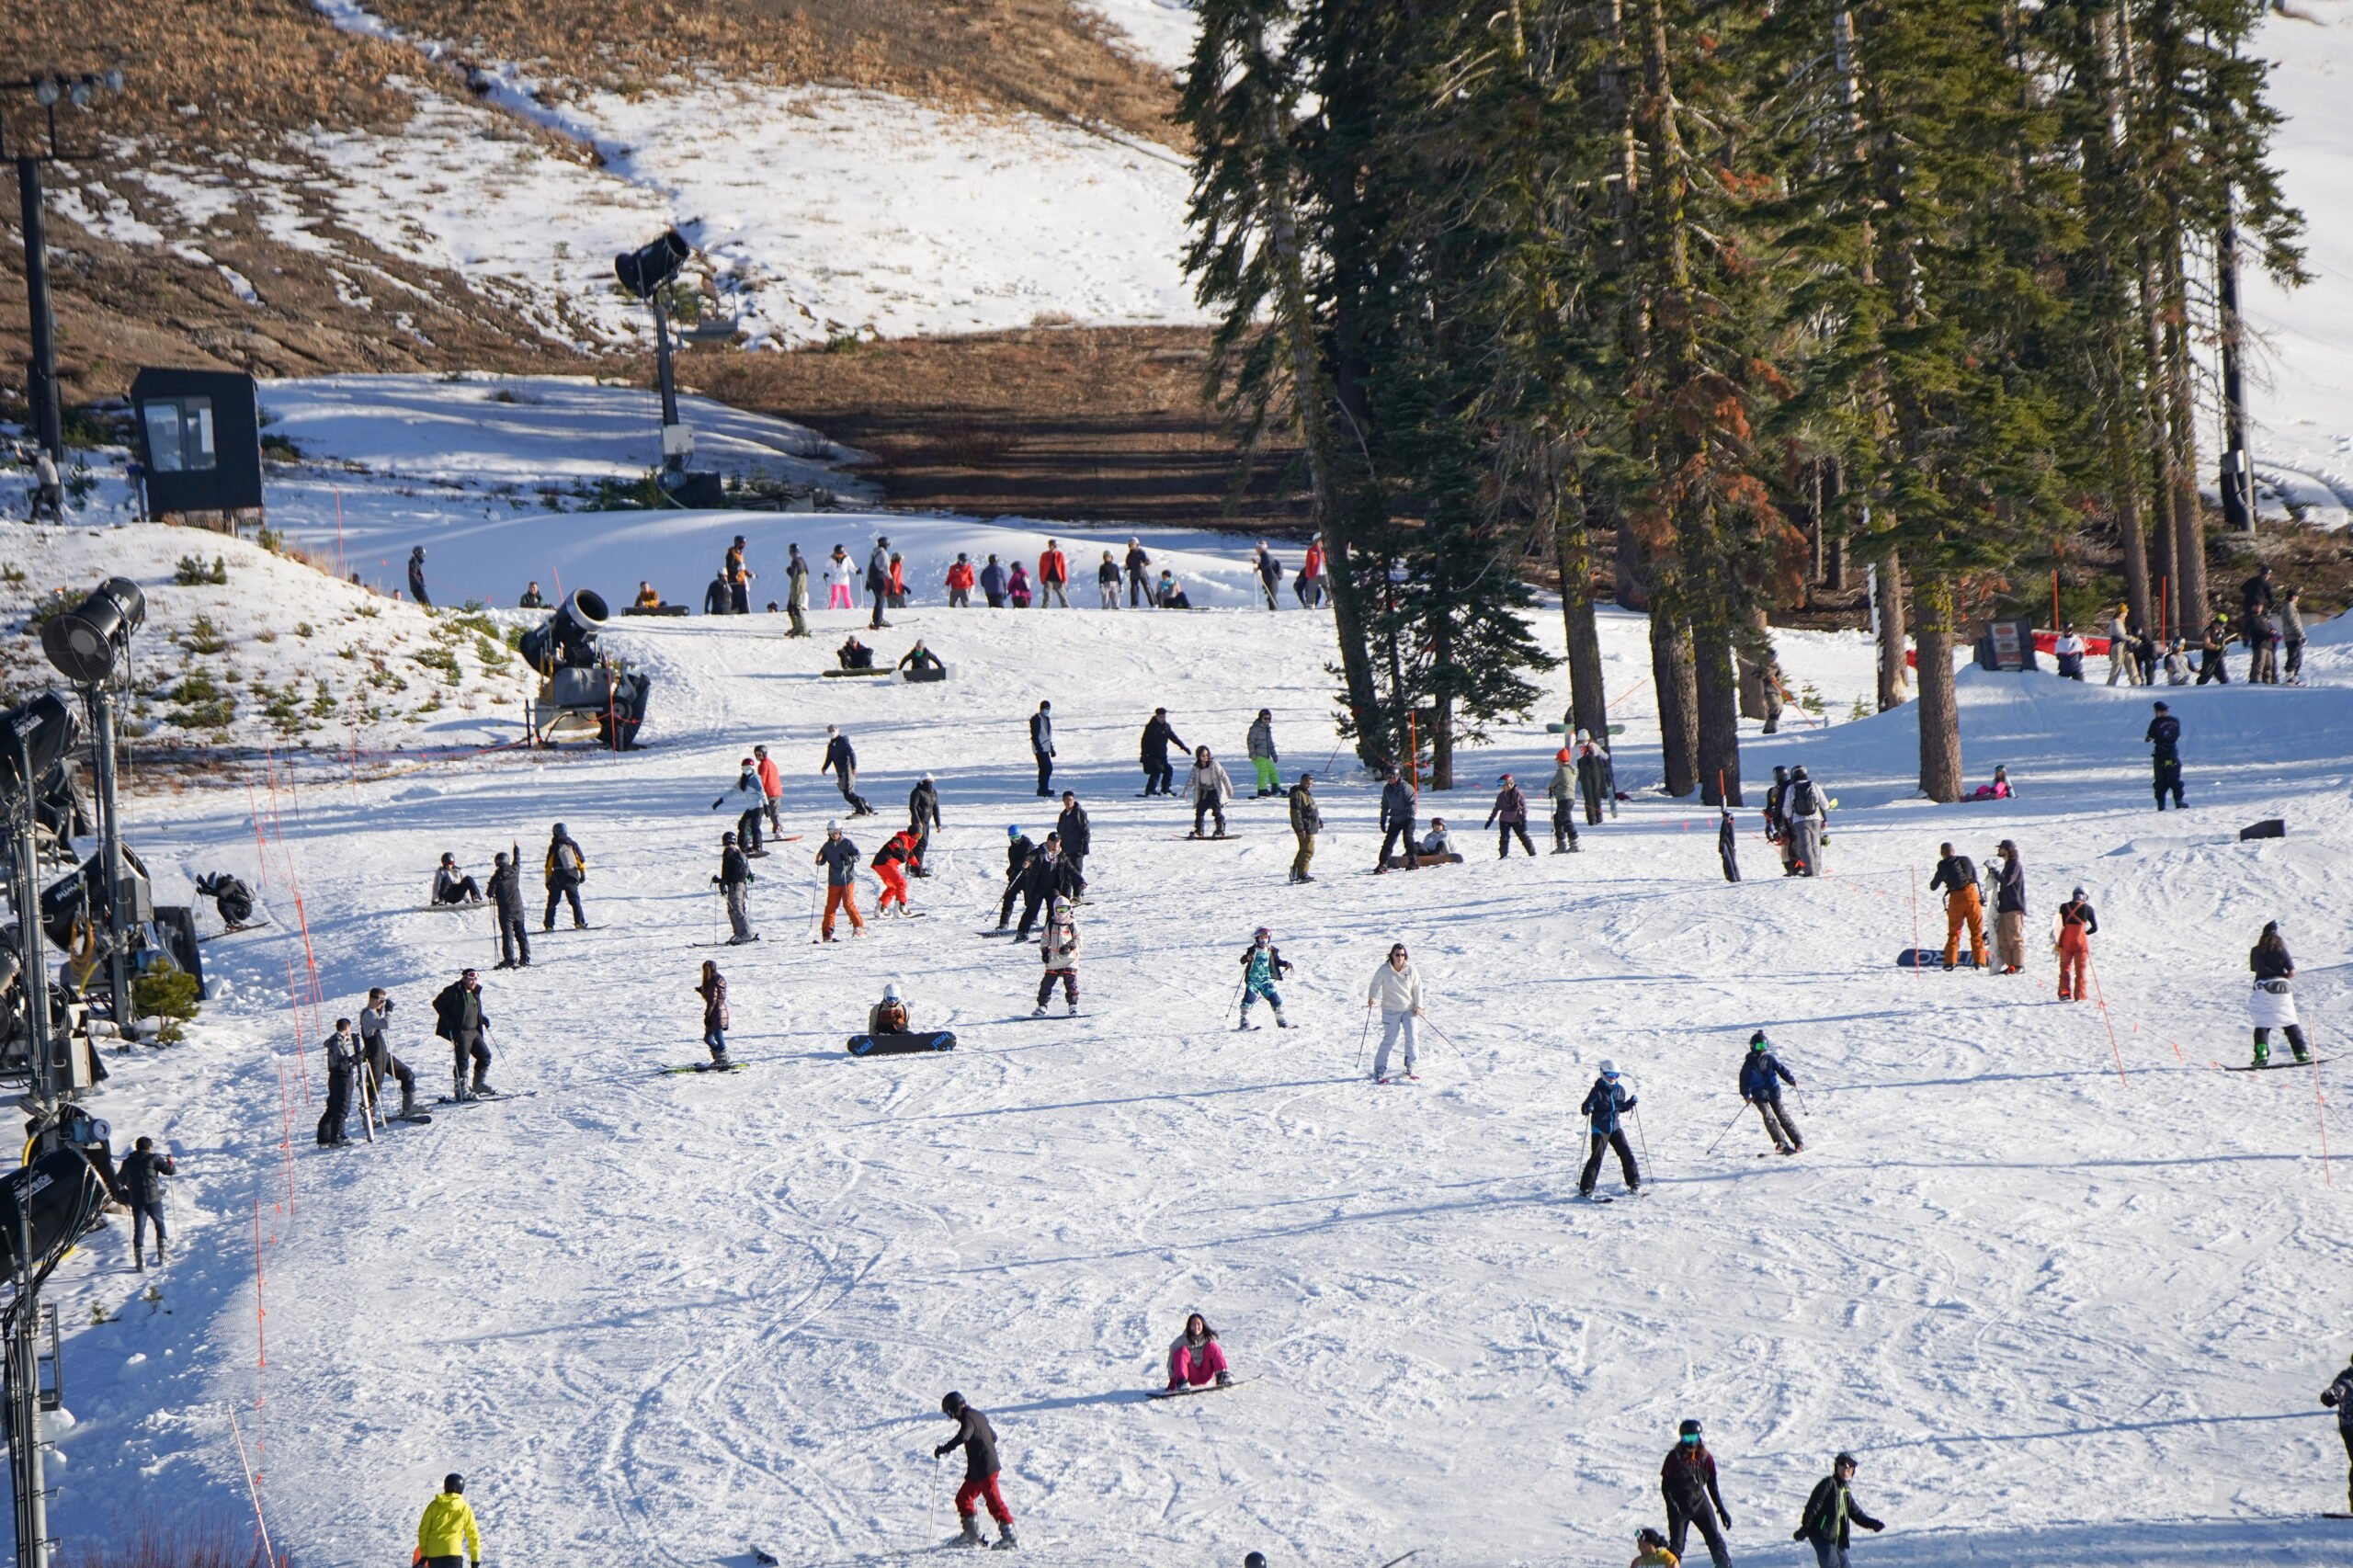 Rain Coming to SF: What It Means for Skiing in Tahoe, Your Allergies and the Drought